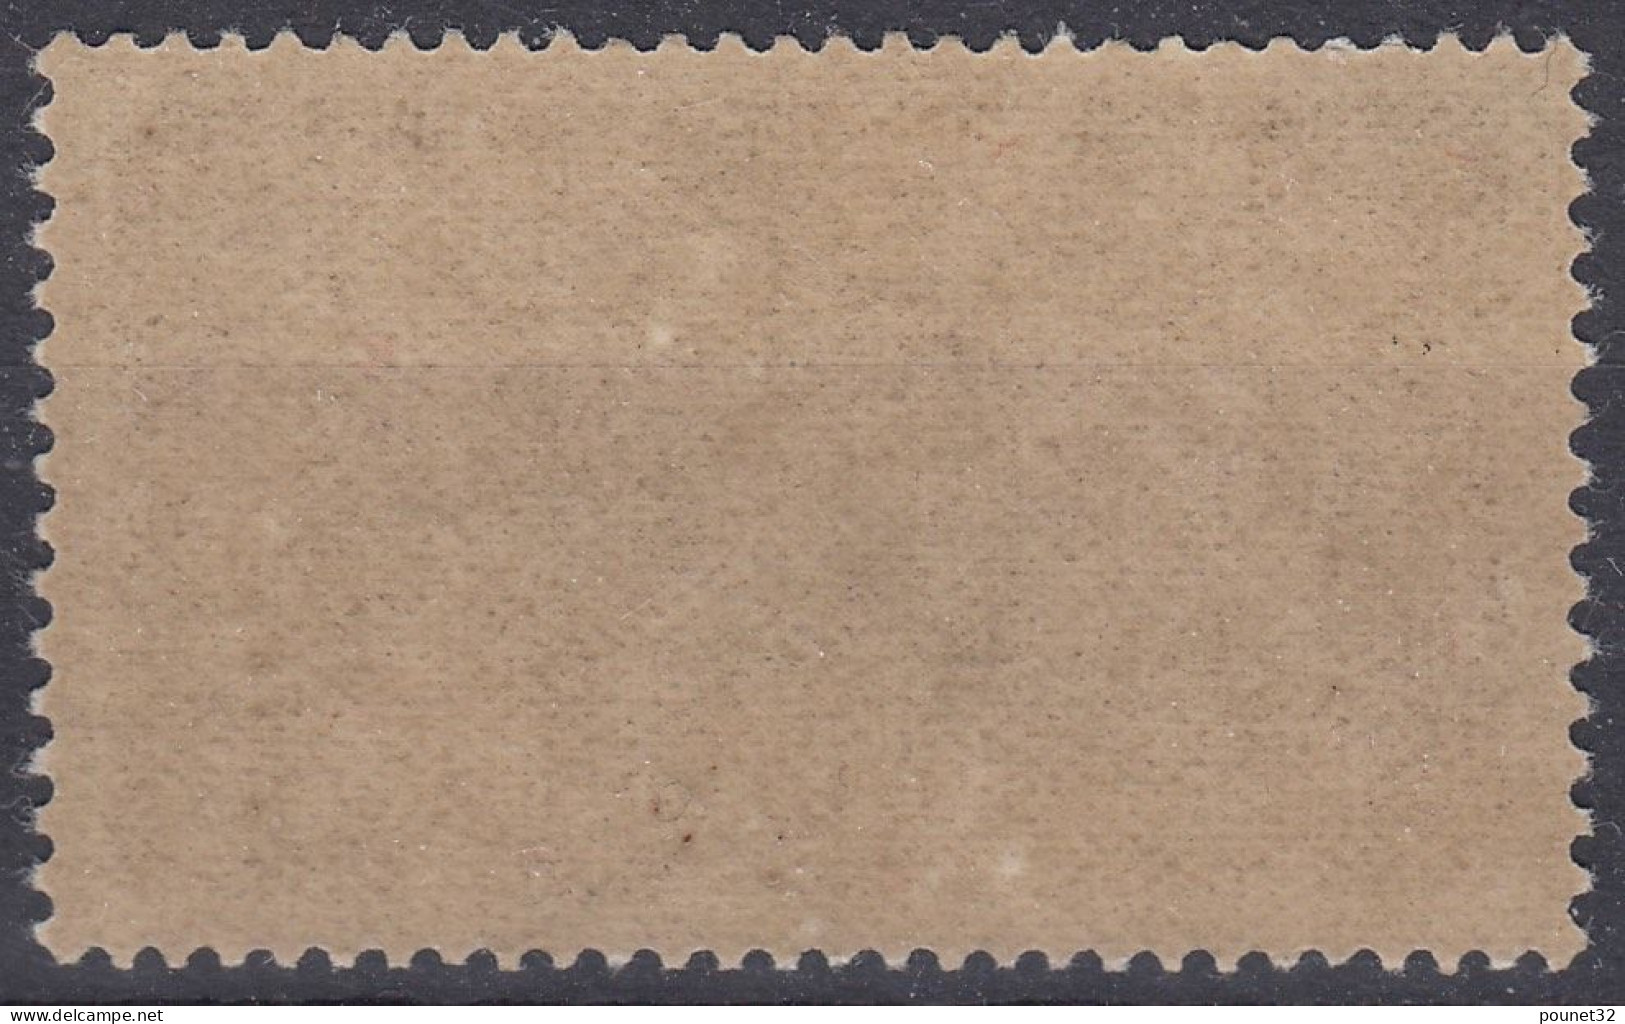 TIMBRE FRANCE MERSON N° 206 NEUF * GOMME LEGERE TRACE DE CHARNIERE - TB CENTRAGE - 1900-27 Merson